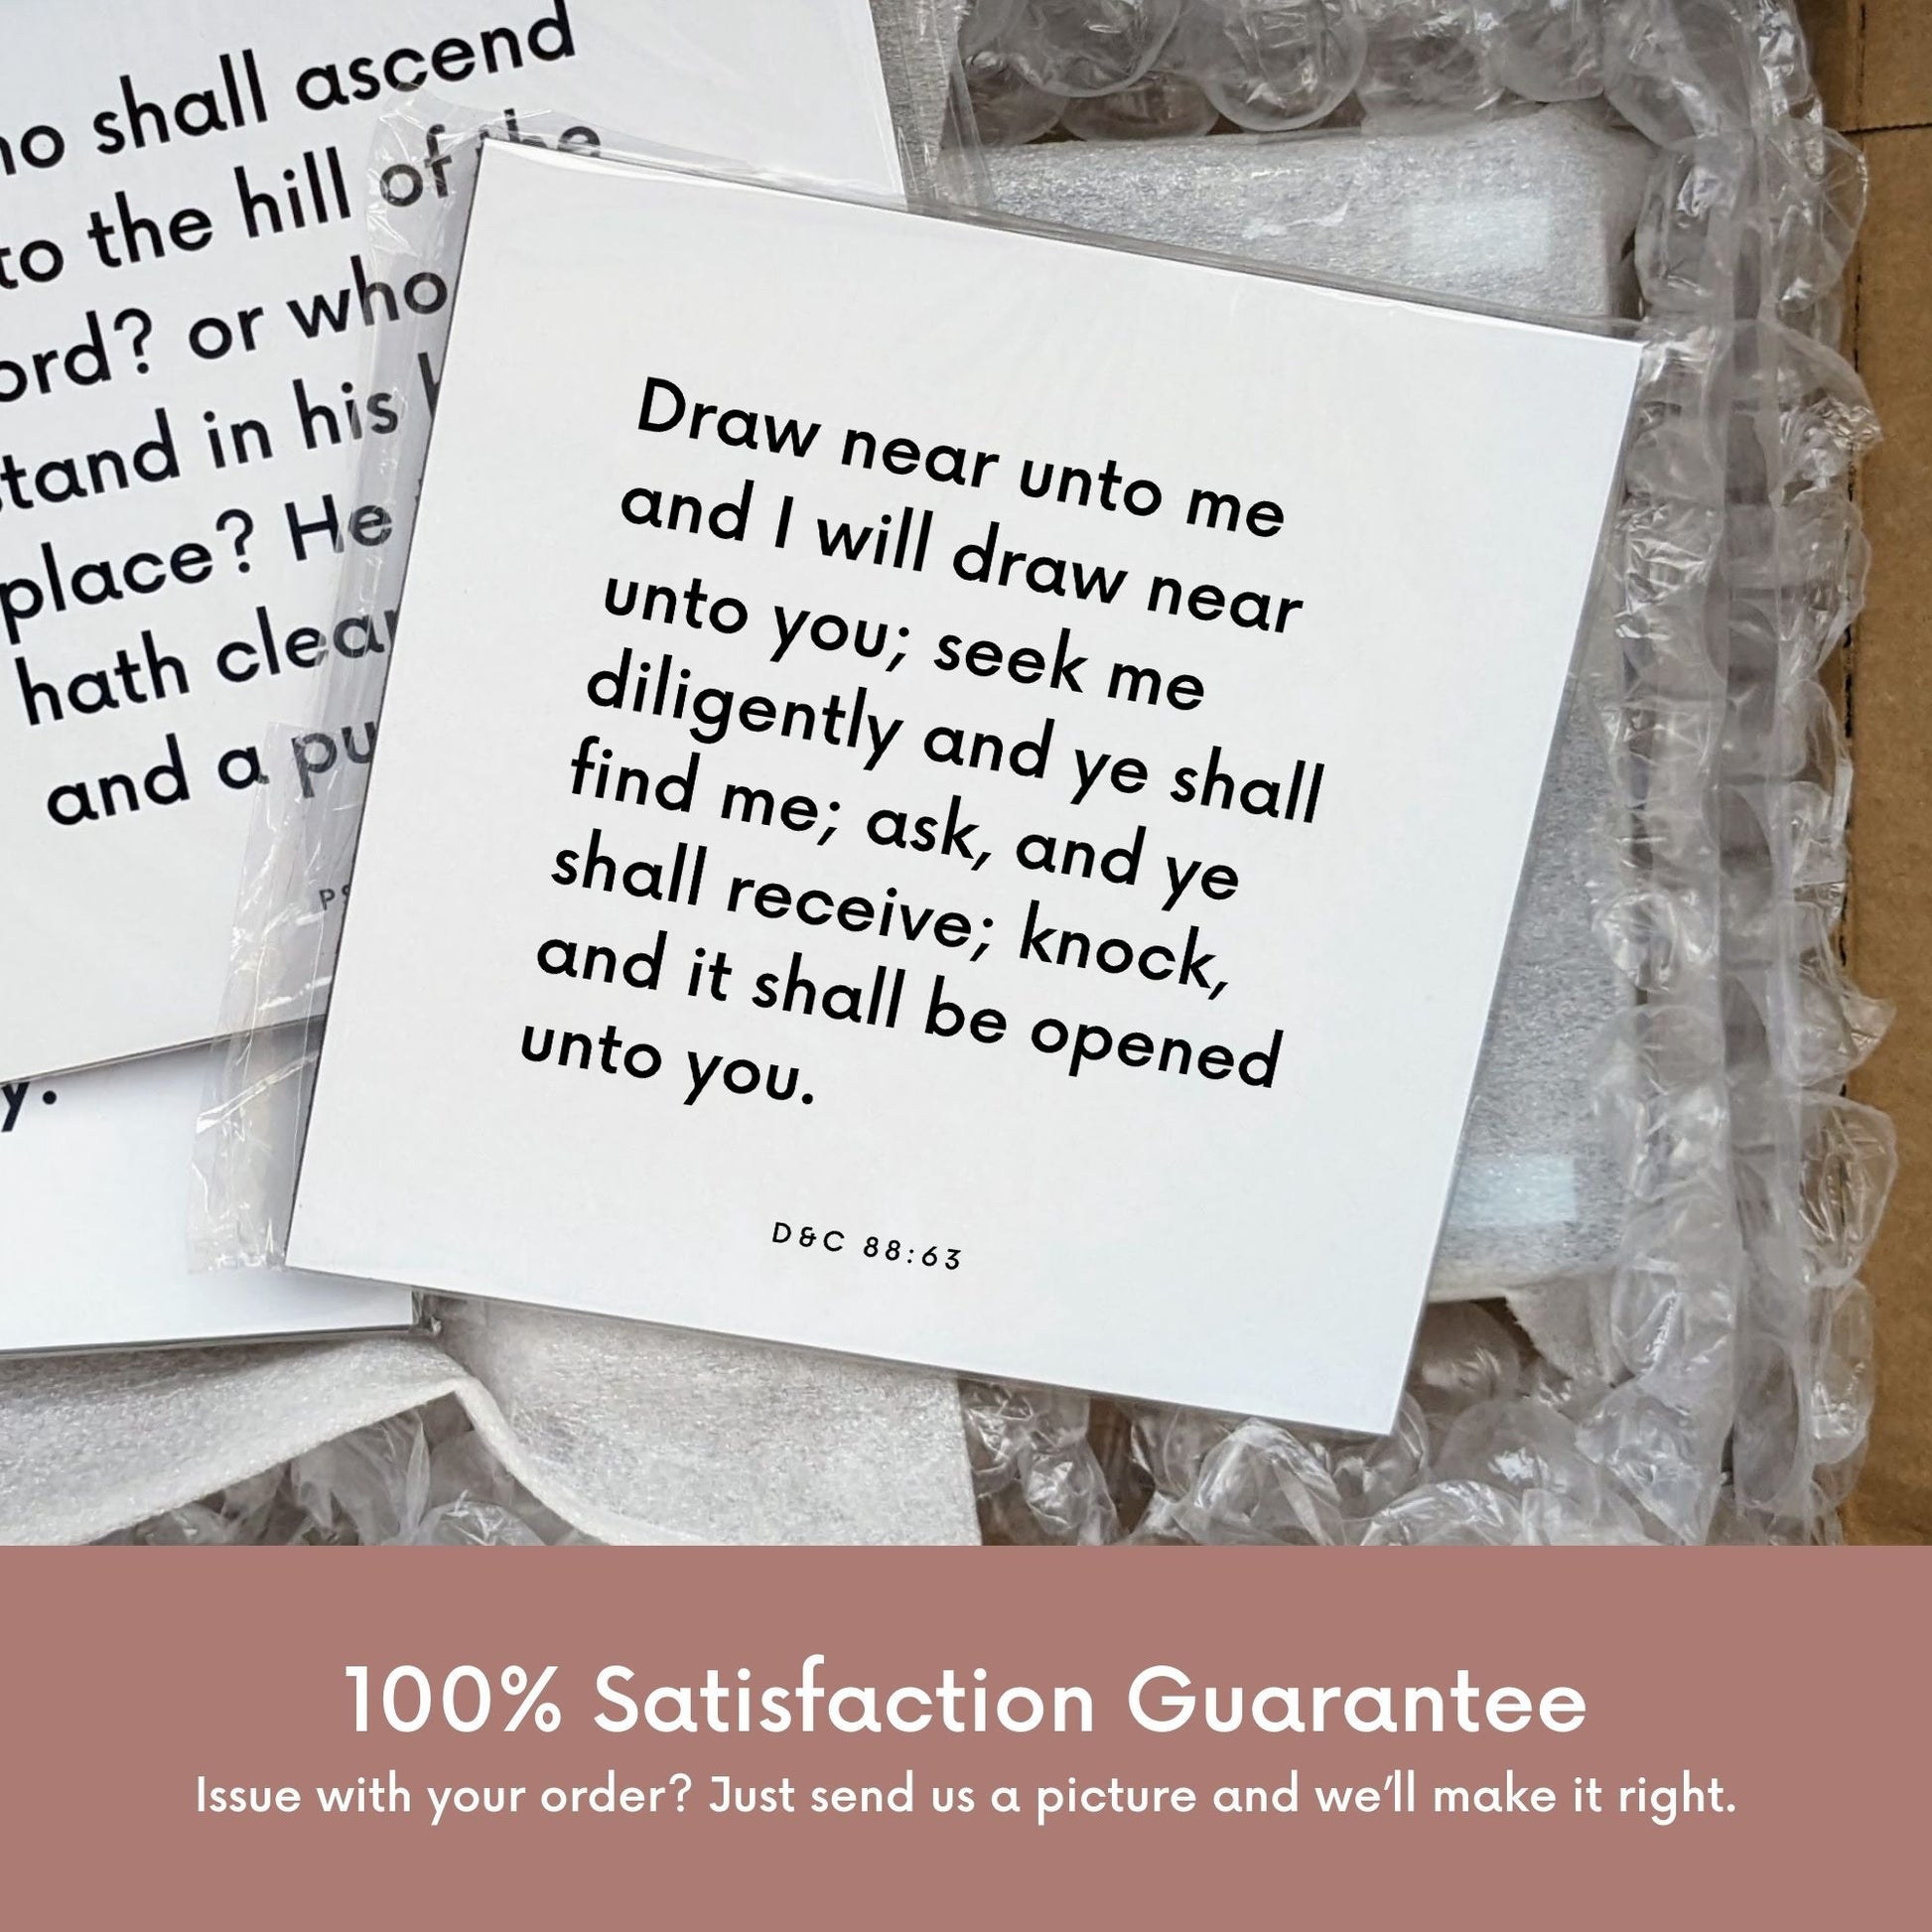 Shipping materials for scripture tile of D&C 88:63 - "Draw near unto me and I will draw near unto you"